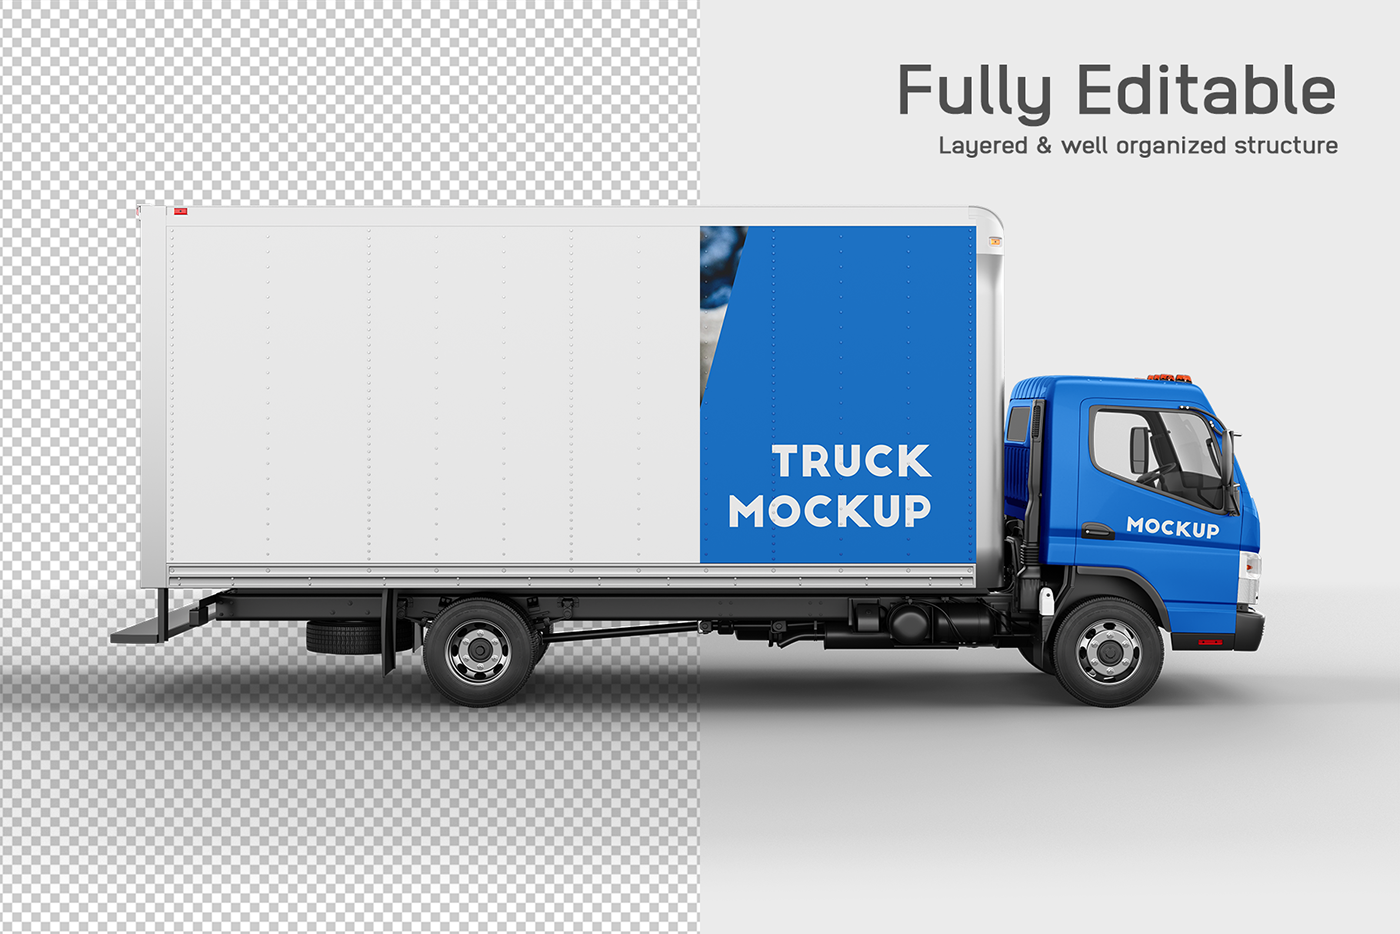 advertising mockup banner company identity delivery truck mockup mitsubishi fuso presentation template spedition &logistics vehicle branding wrapping mockup wraps & stickers